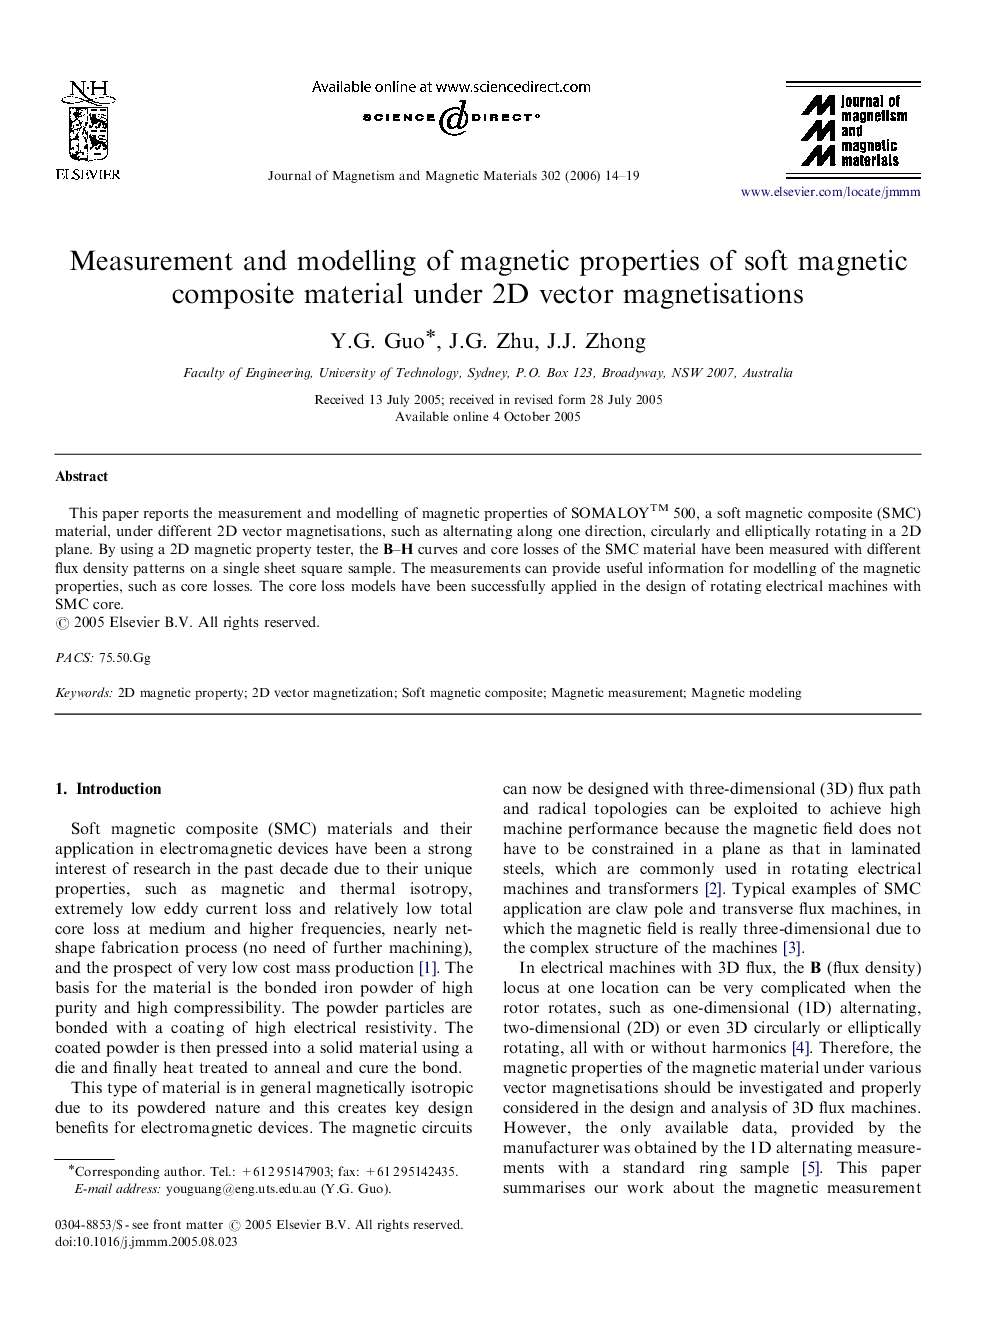 Measurement and modelling of magnetic properties of soft magnetic composite material under 2D vector magnetisations